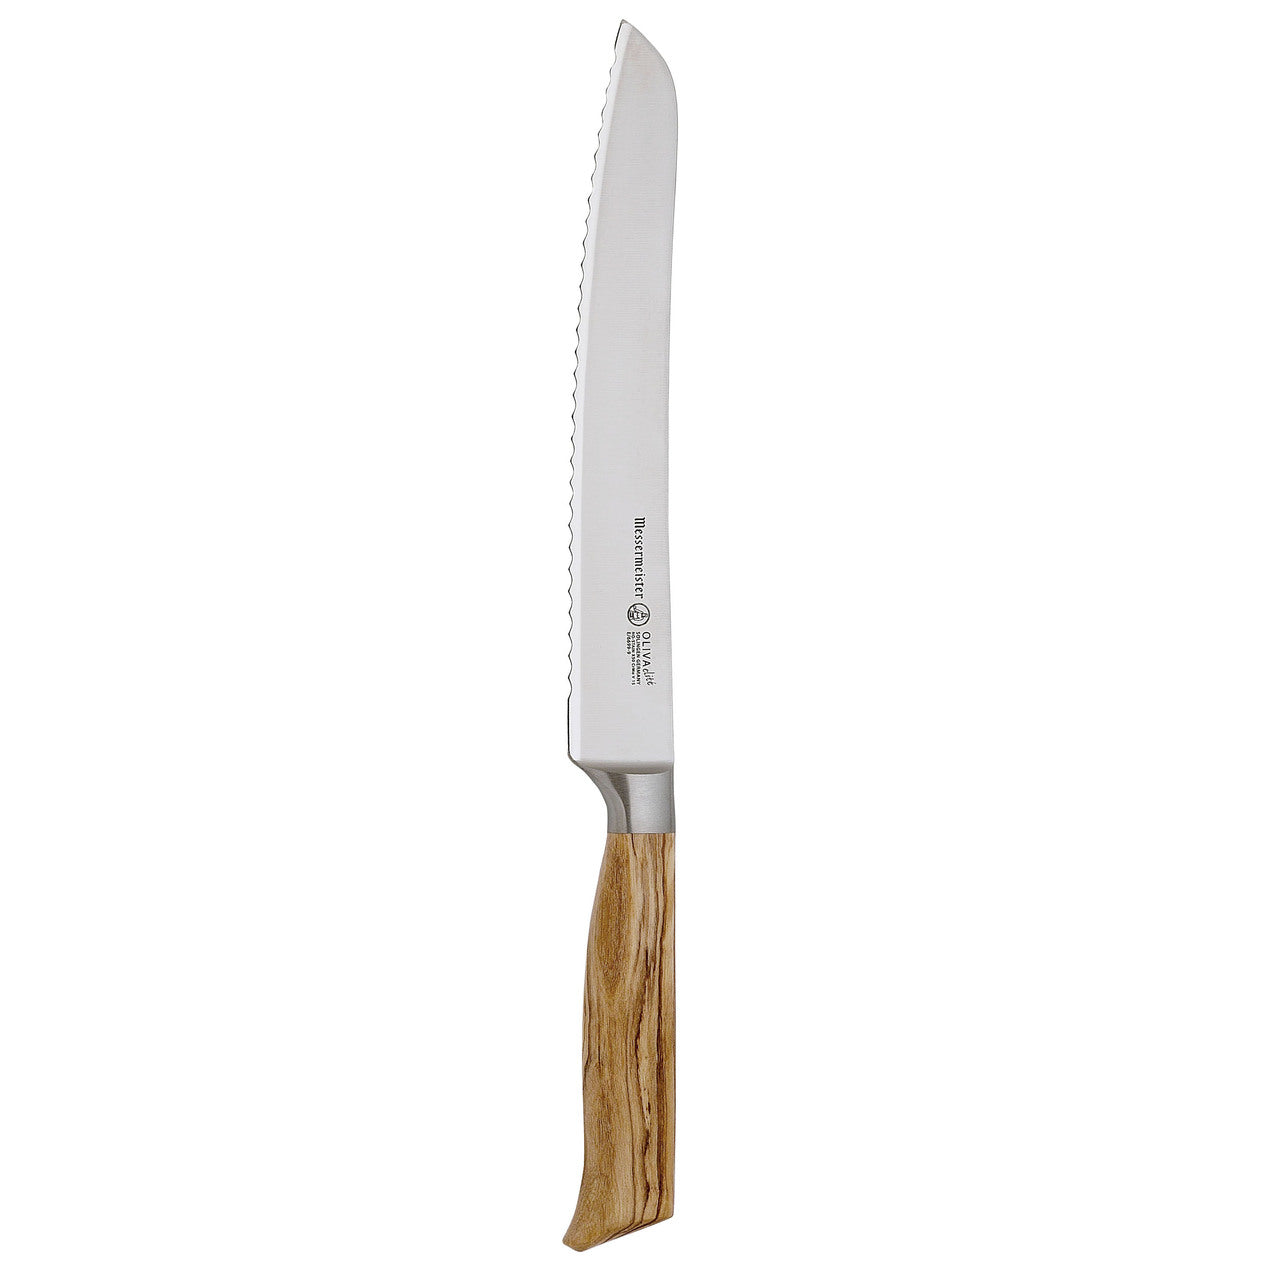 BEON.COM.AU E6699 9         Oliva Elite 9 Inch Scalloped Bread Knife The Messermeister Oliva Elite 9 Inch Bread Knife has a scalloped edge with a gentle camber. Serrations on this knife’s scalloped edge produce smooth, clean and precise cuts whether you’re slicing bread or soft-skinned fruits and vegetables.... Messermeister at BEON.COM.AU